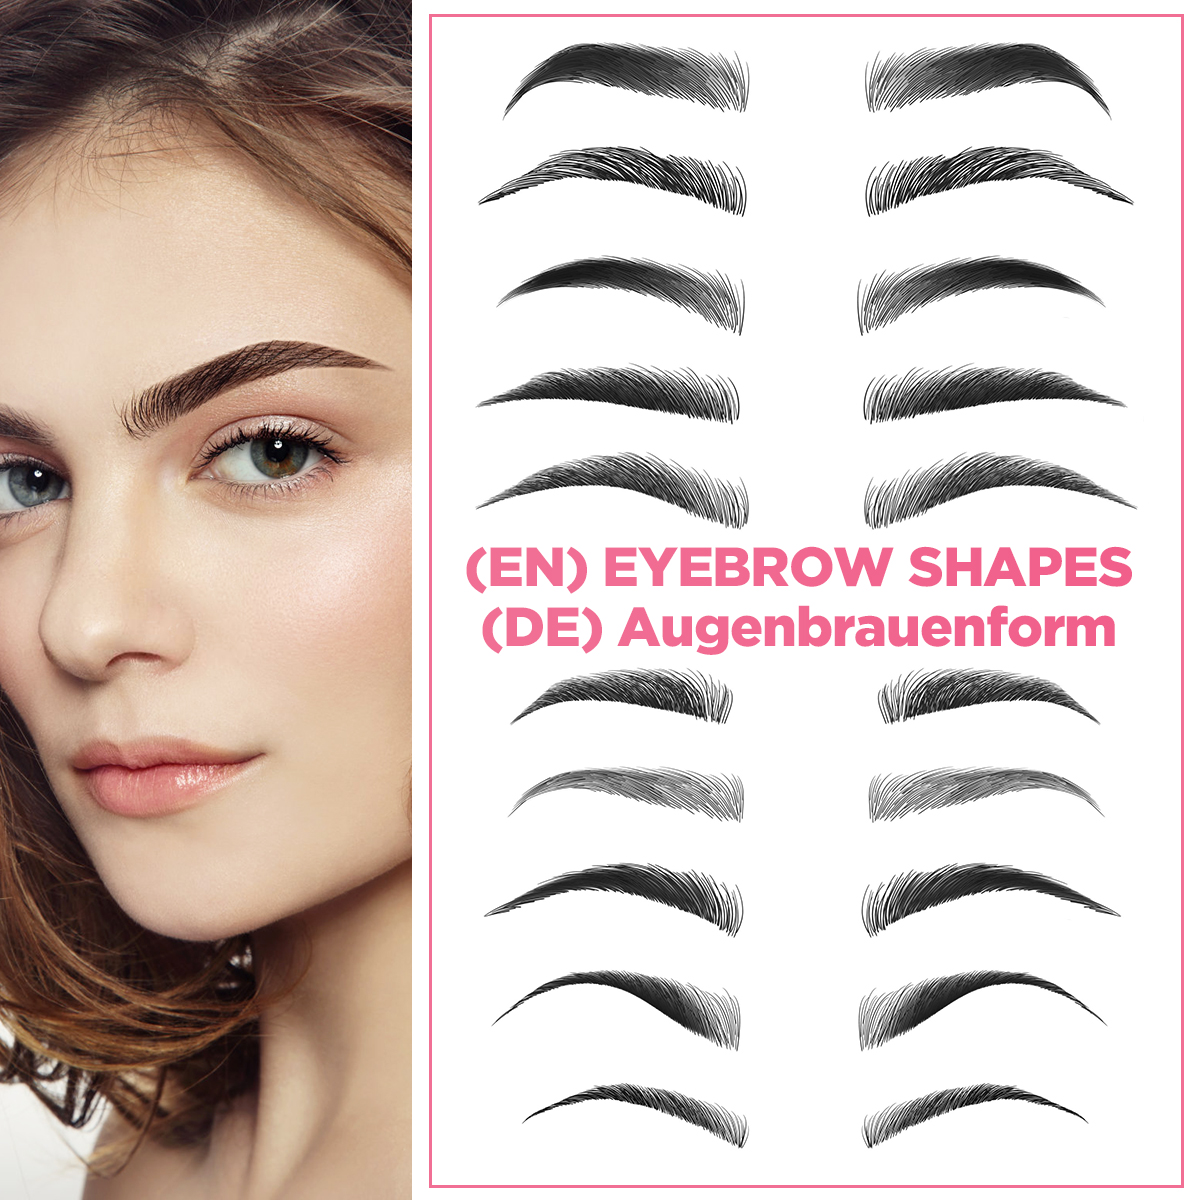 100PCS-Eyebrow-Stencil-One-time-Eyebrow-Grooming-Stencil-Measure-Ruler-Brow-Shaper-Makeup-Shaping-To-1940017-5